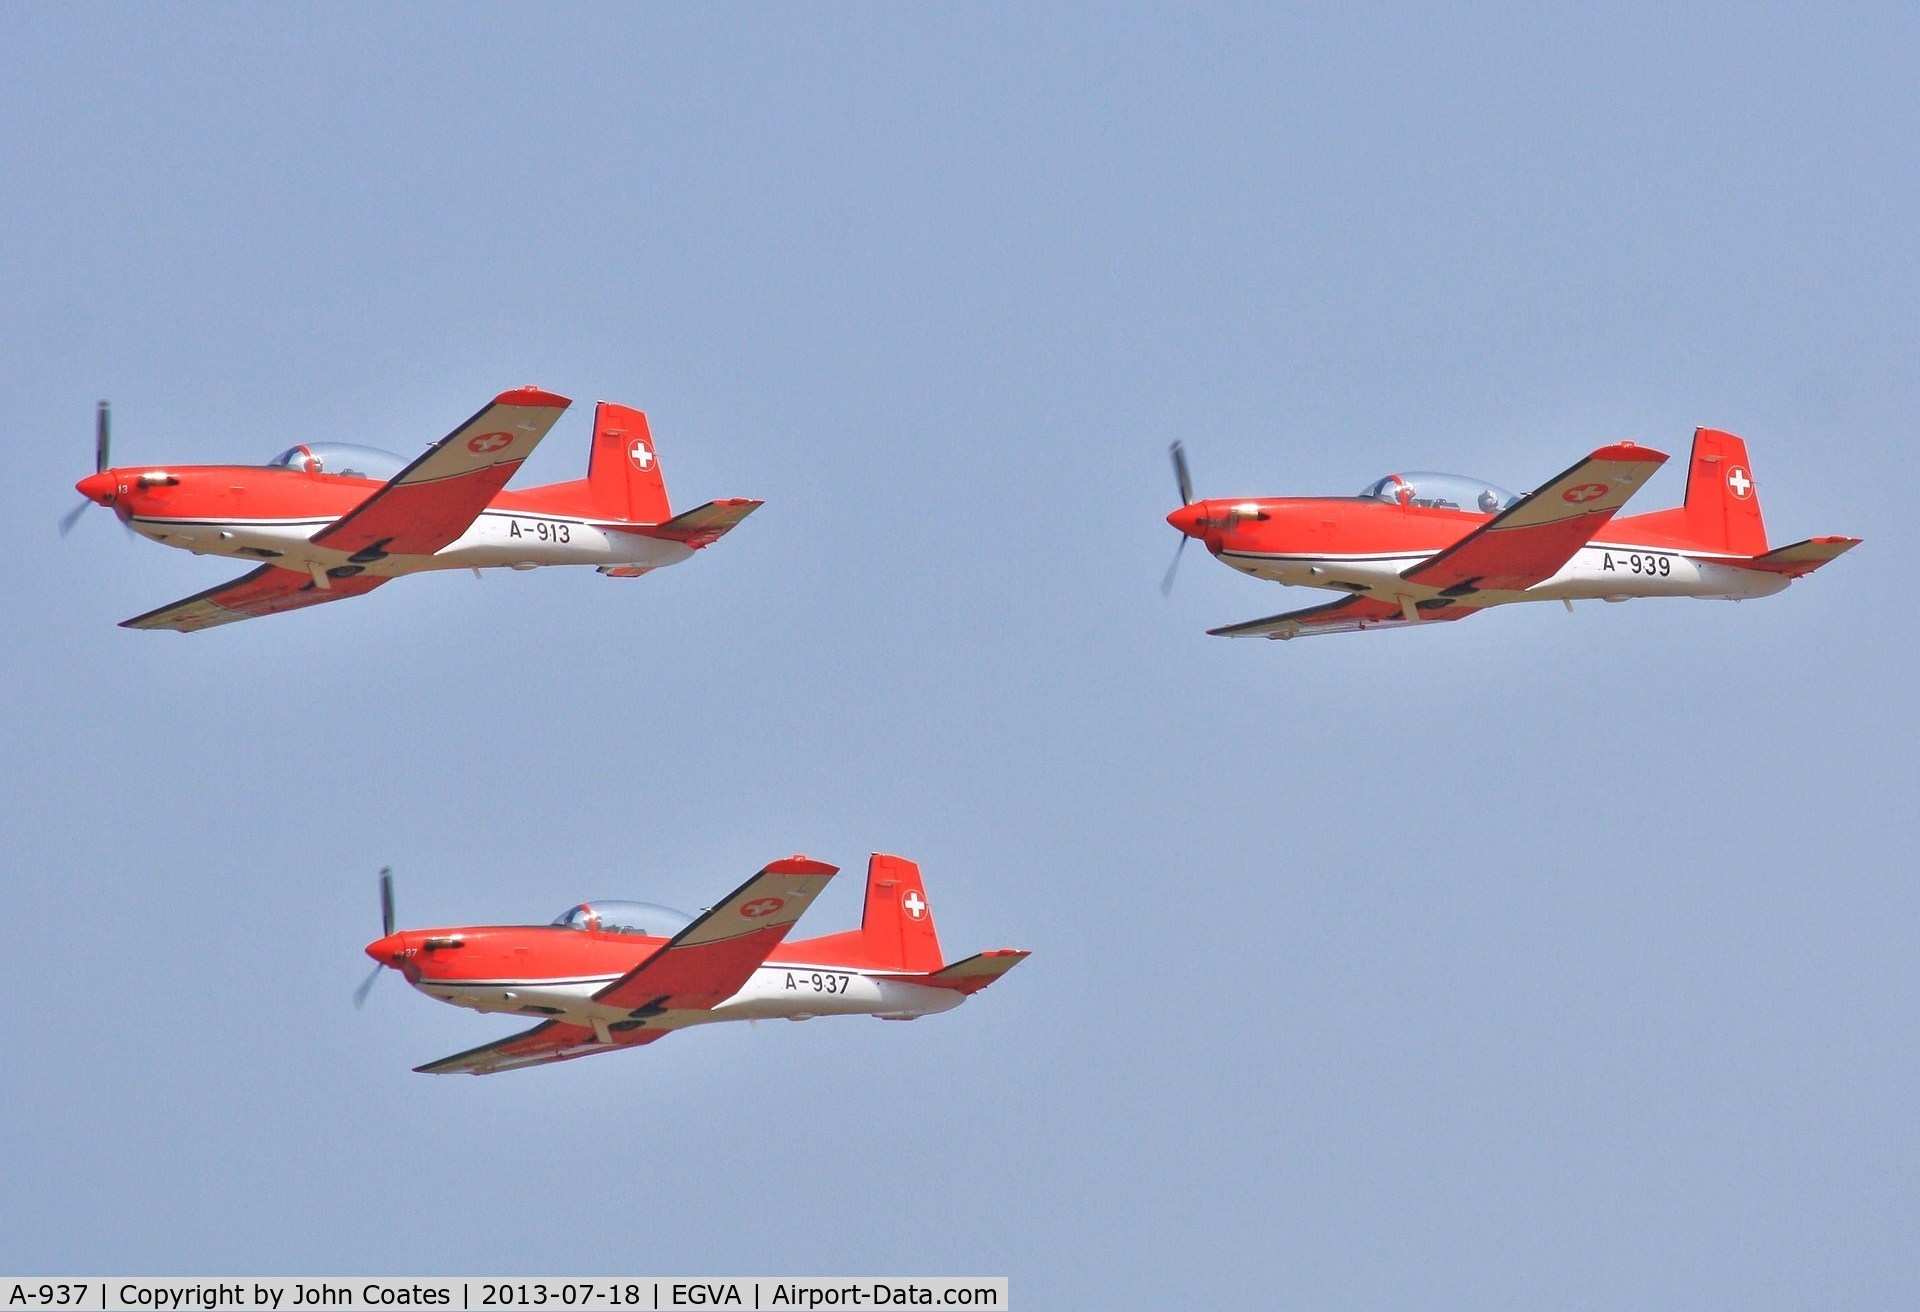 A-937, 1983 Pilatus PC-7 Turbo Trainer C/N 345, Arriving at RIAT with A-913 and A-939 Swiss Team PC7s.